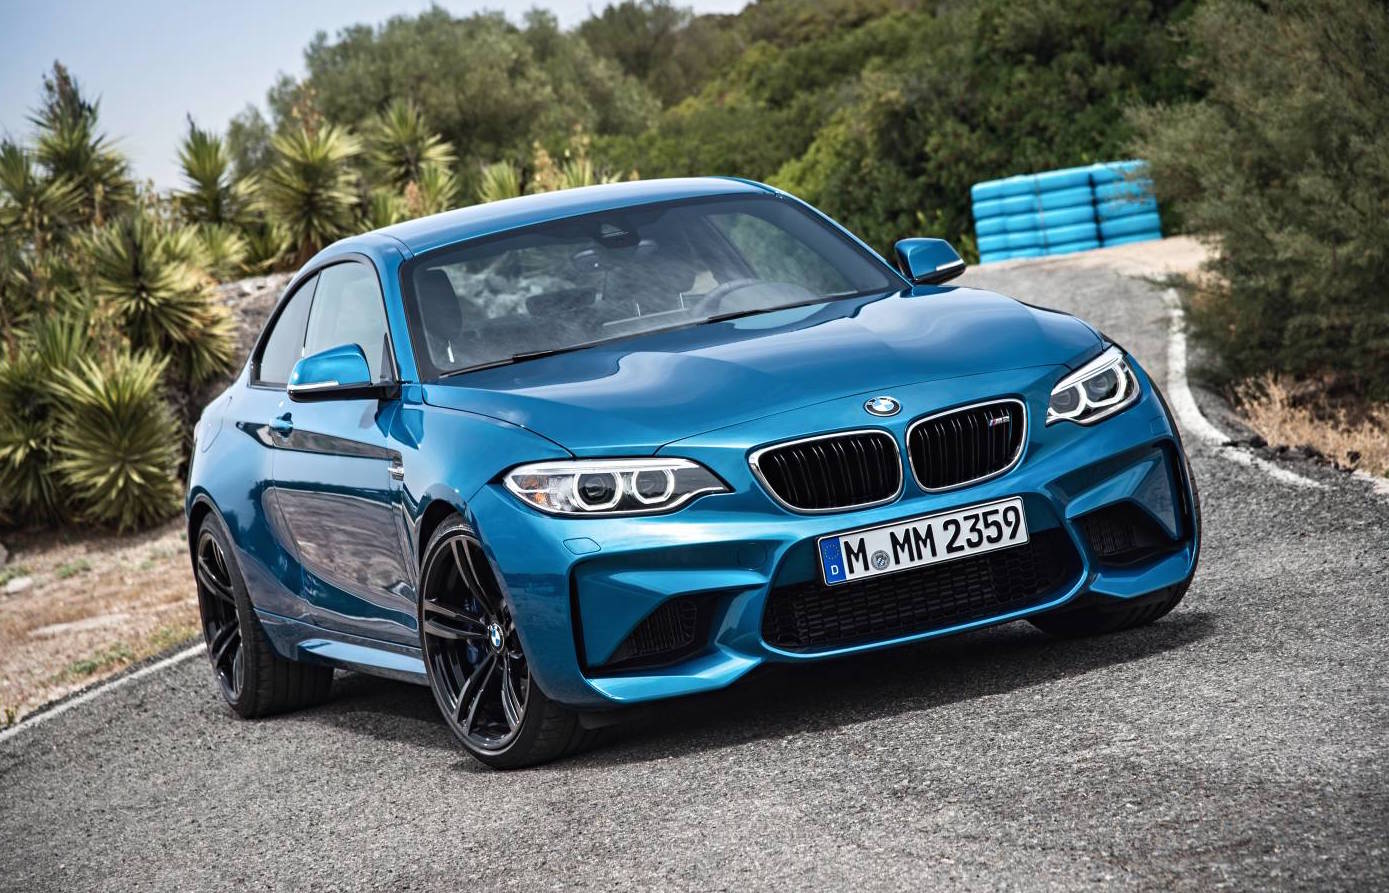 2016 BMW M2 Coupe Sold Out in Australia